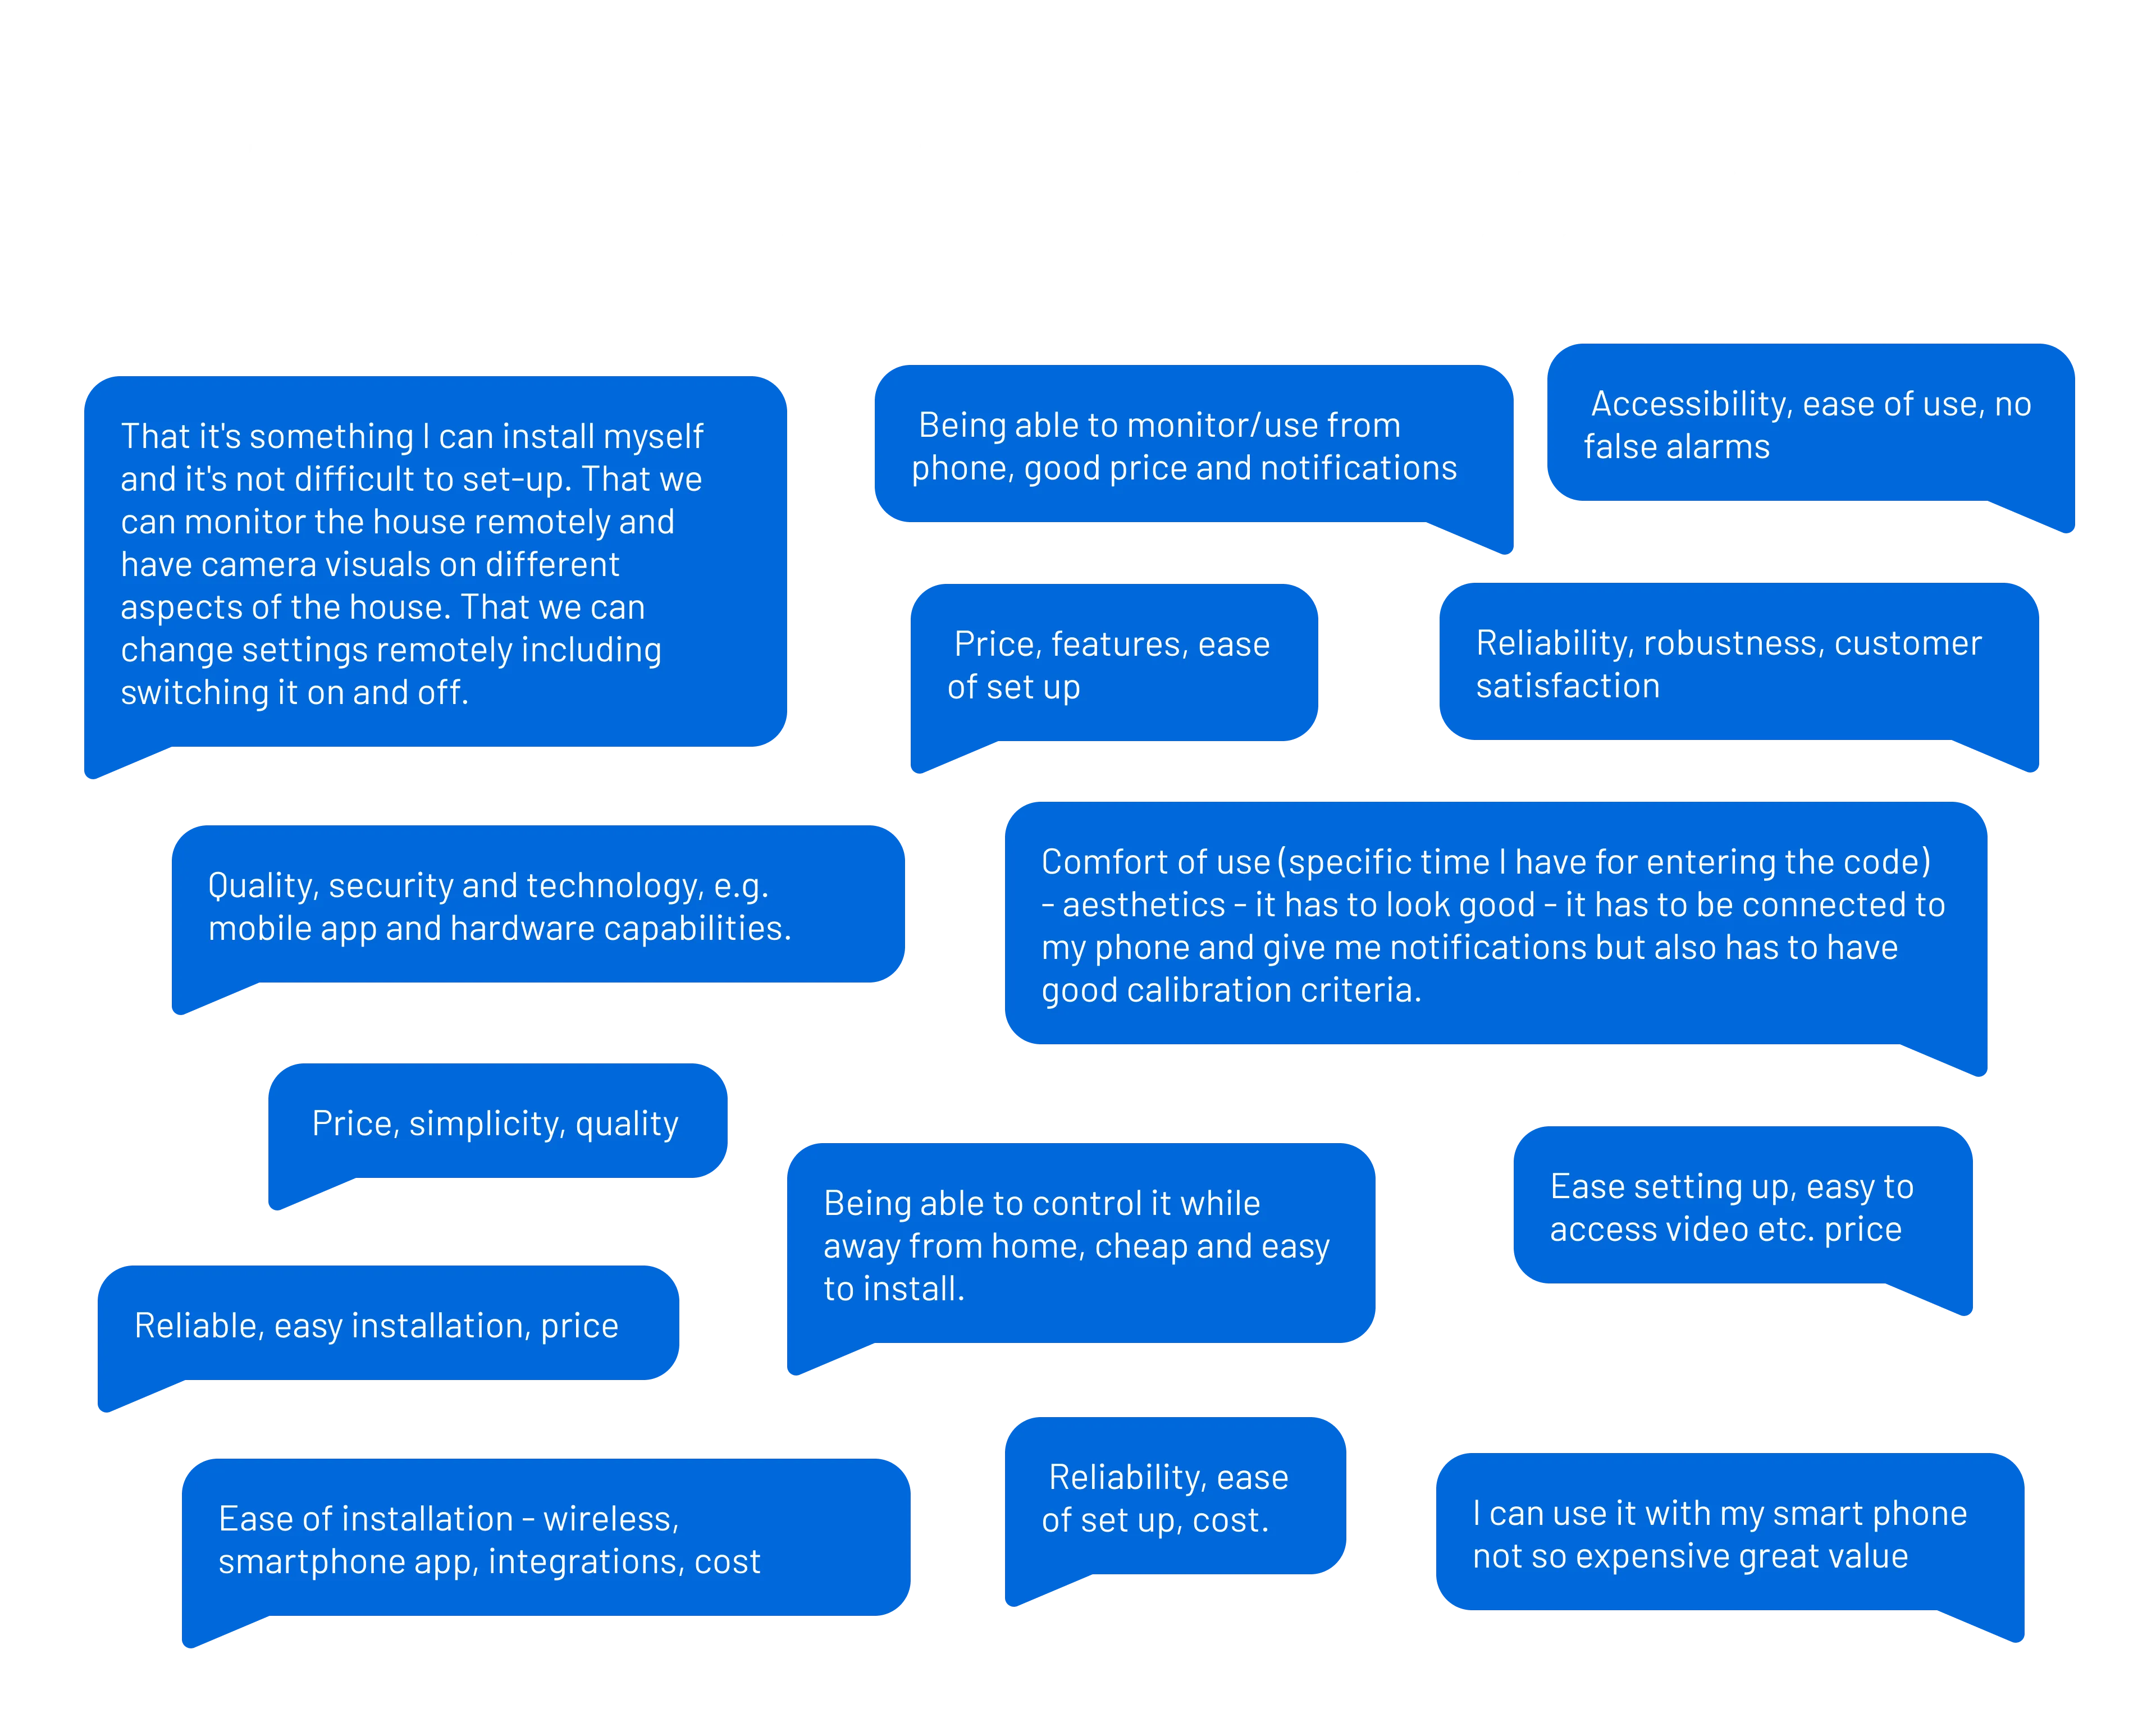 Infographic with various text blocks, each containing different criteria that people might consider when selecting a home security system. At the top, in white text on a dark background, the title reads "What would be the main three criteria for you to take into account when selecting a home security system?" Below this title are multiple blue text bubbles with different preferences listed, such as ease of installation, quality, price, the ability to control and monitor the system remotely, no false alarms, and customer satisfaction.